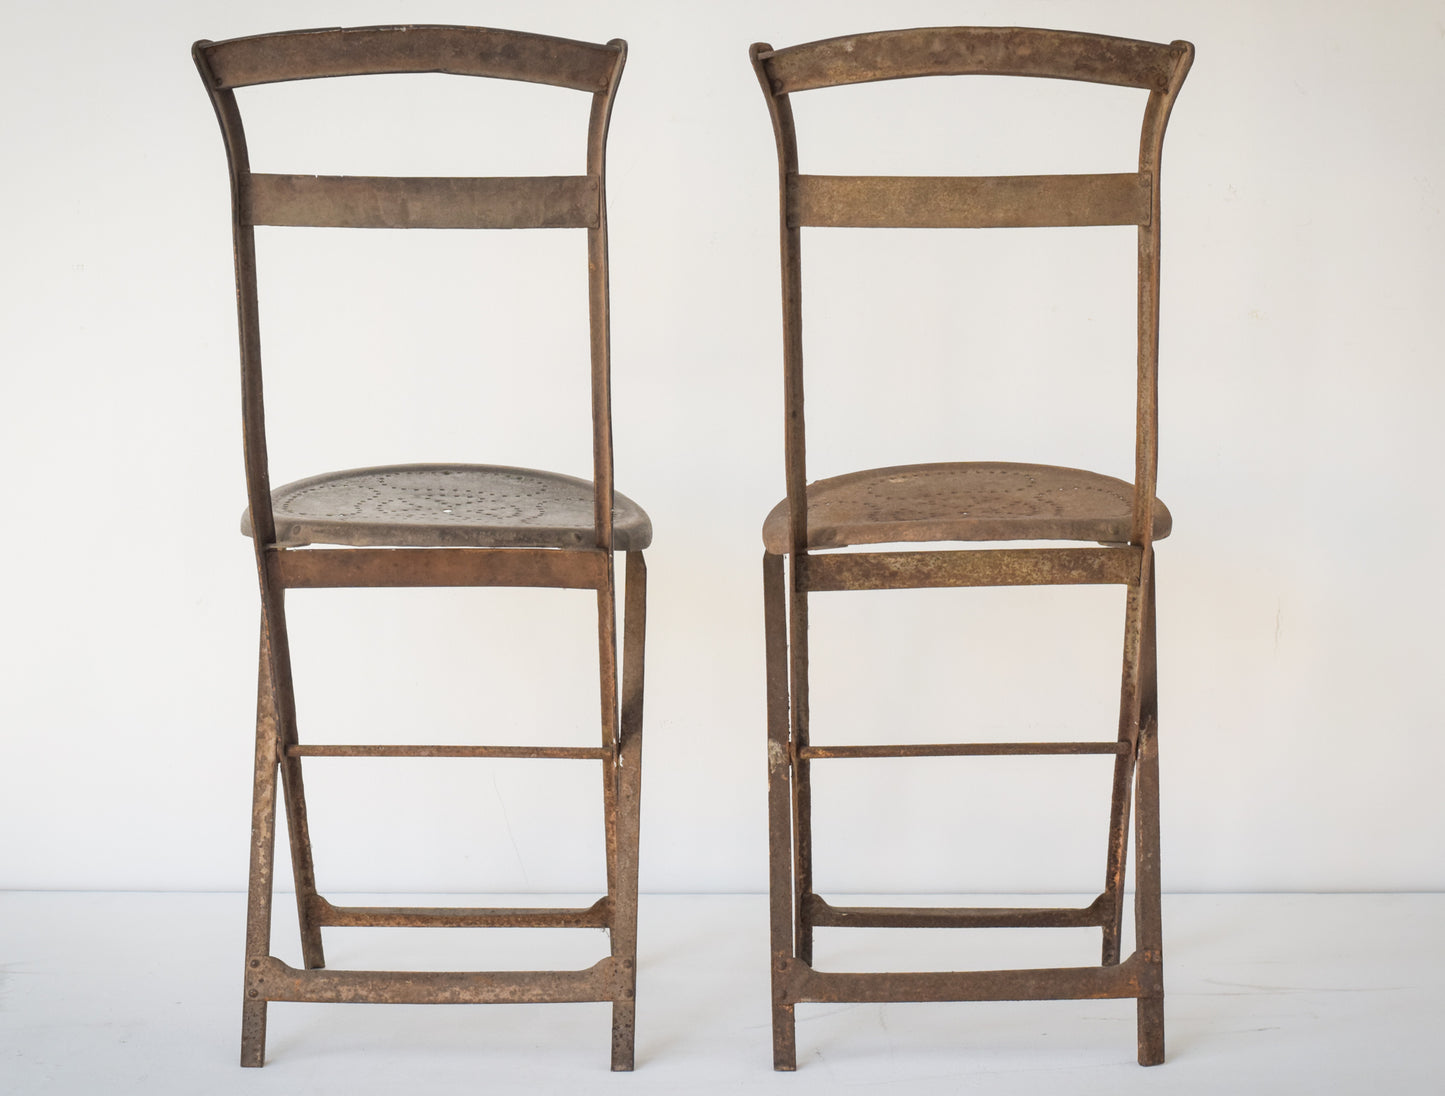 Elegant Antique Pair of French Folding Chairs_Rear